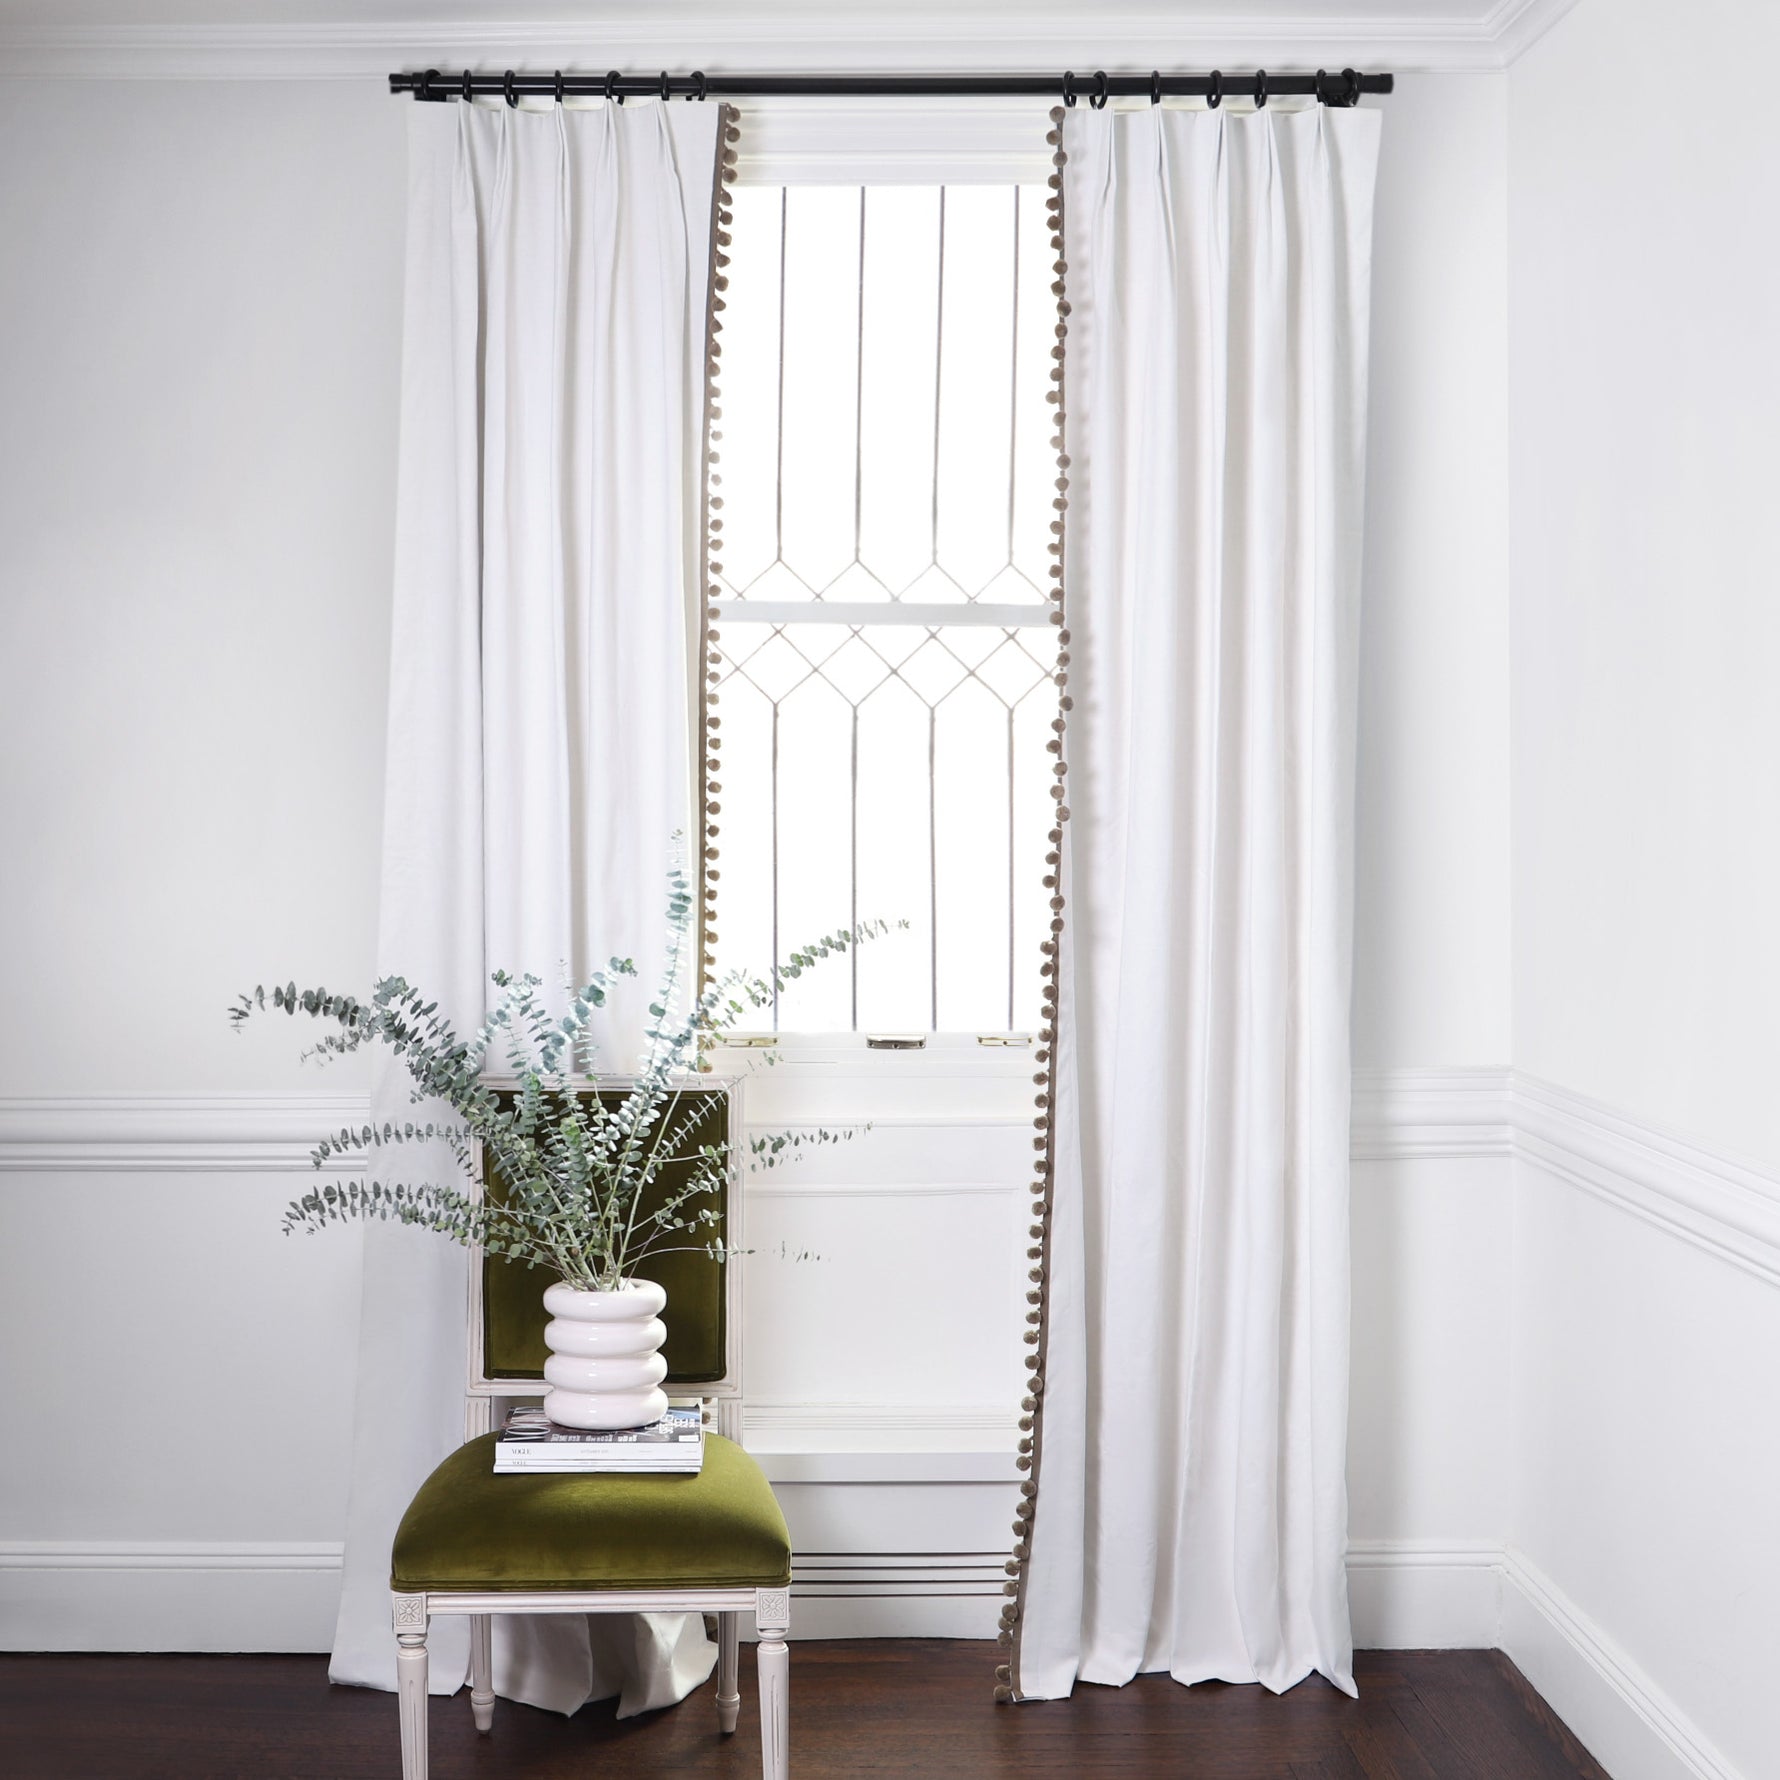 White Cotton Curtains with sage green pom poms on metal rod in front of an illuminated window with Sage Green Velvet chair with plants in white vase on top of magazines.